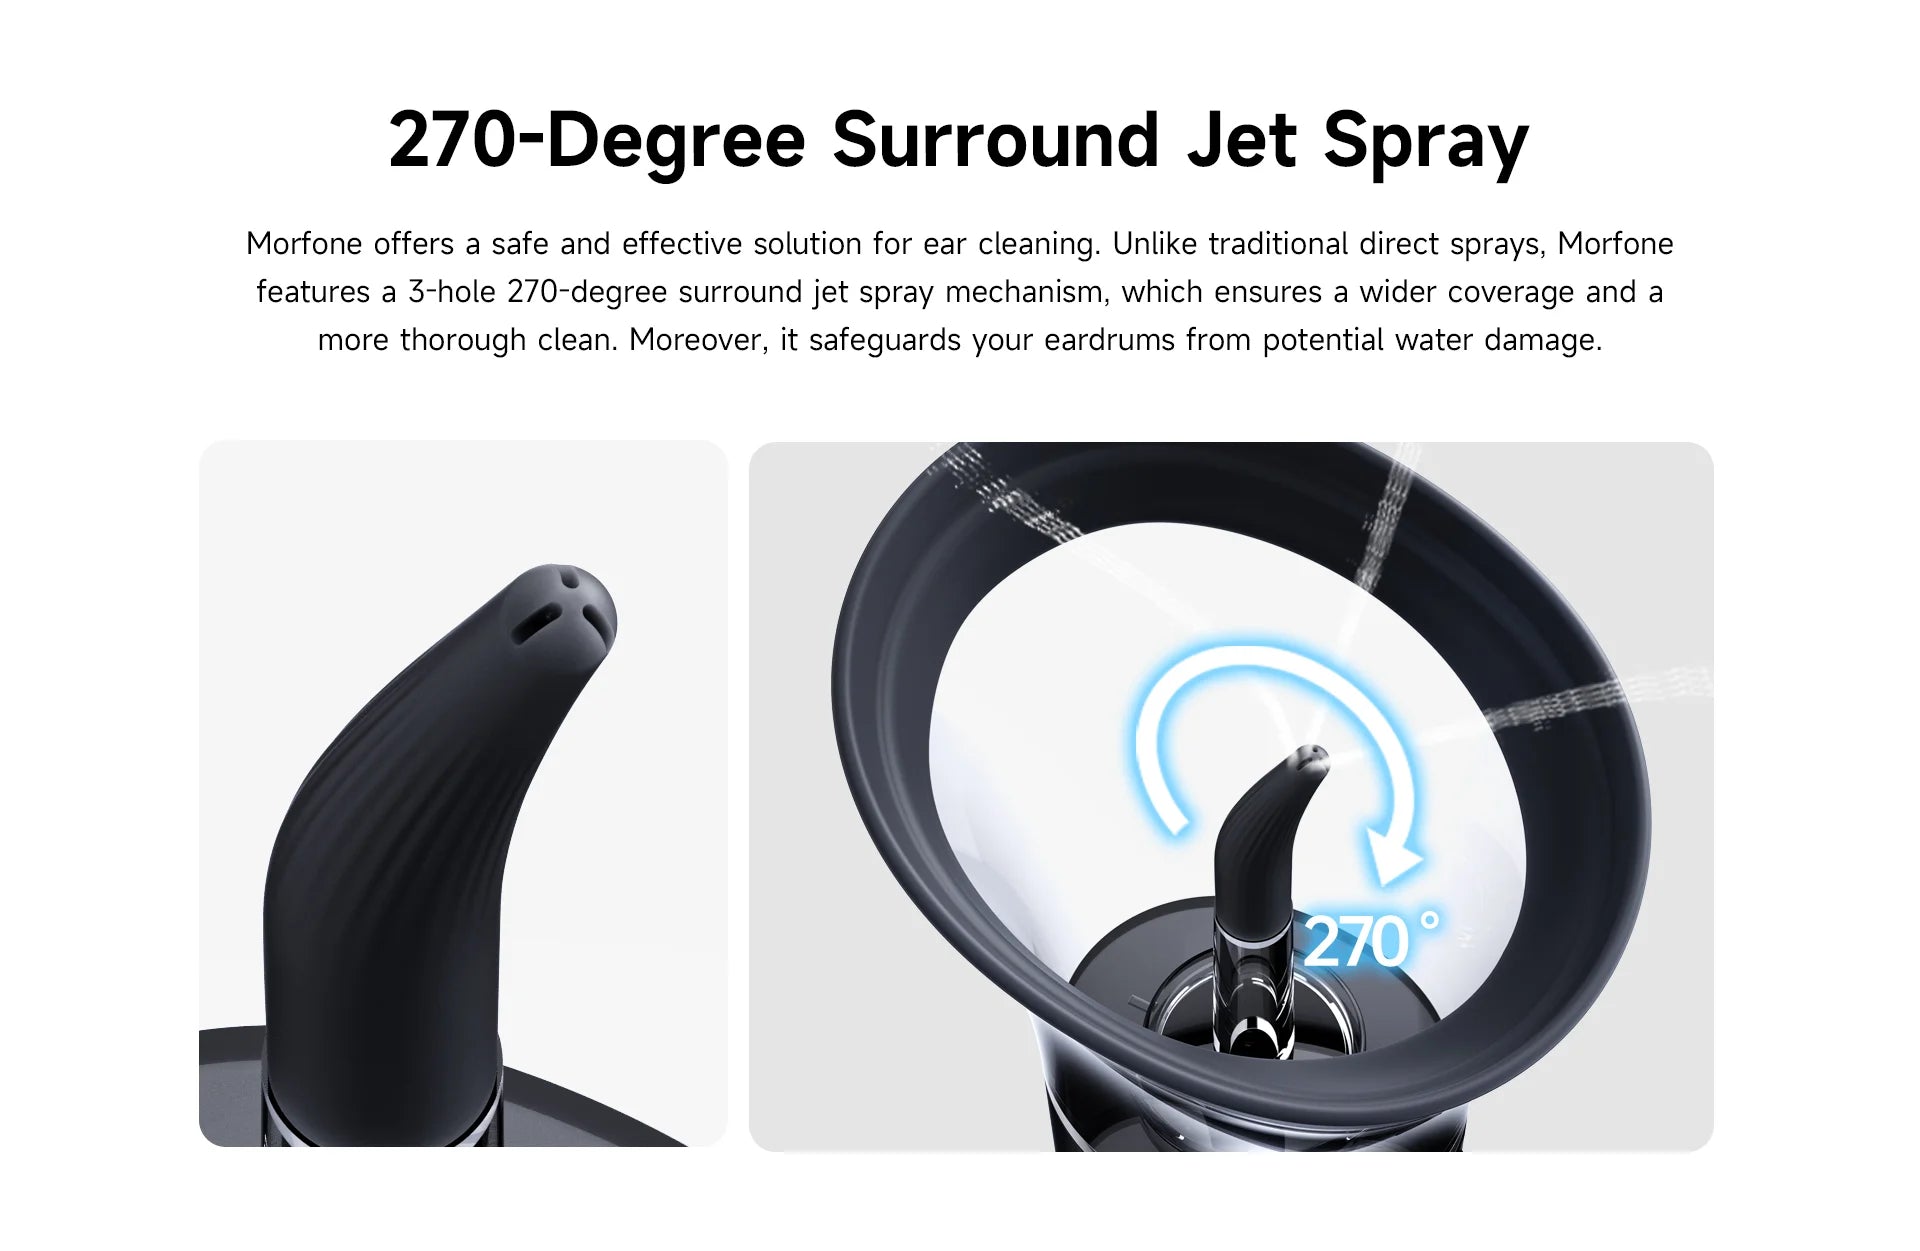 Experience the 270-Degree Surround Jet Spray of Morfone for Safe and Effective Ear Cleaning.